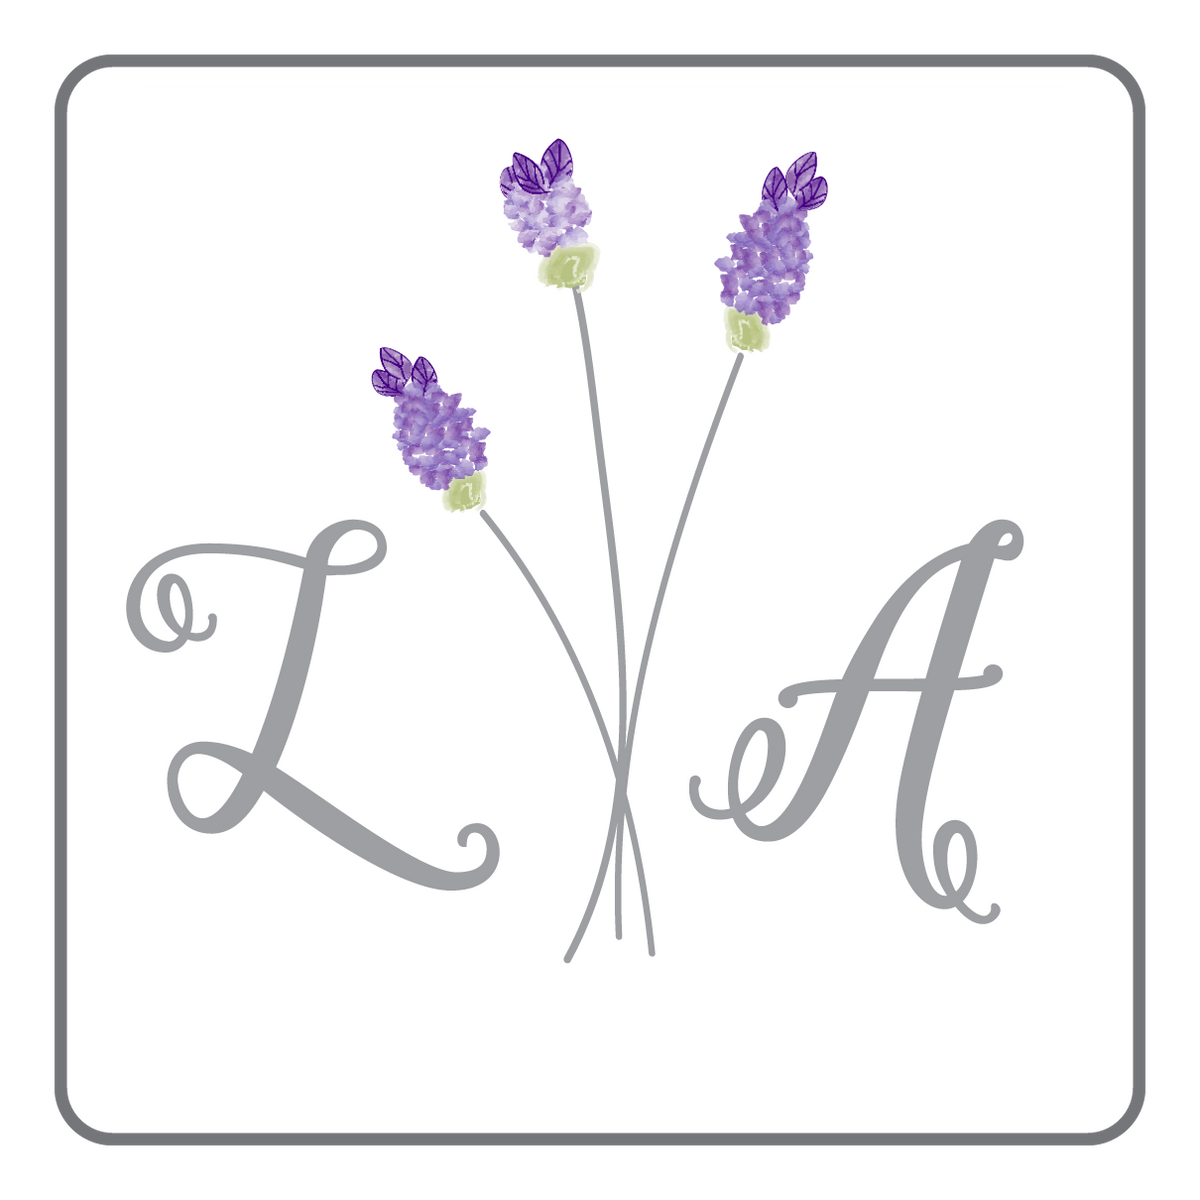 Lilac Lavender Body Oil – Akorn Apothecary